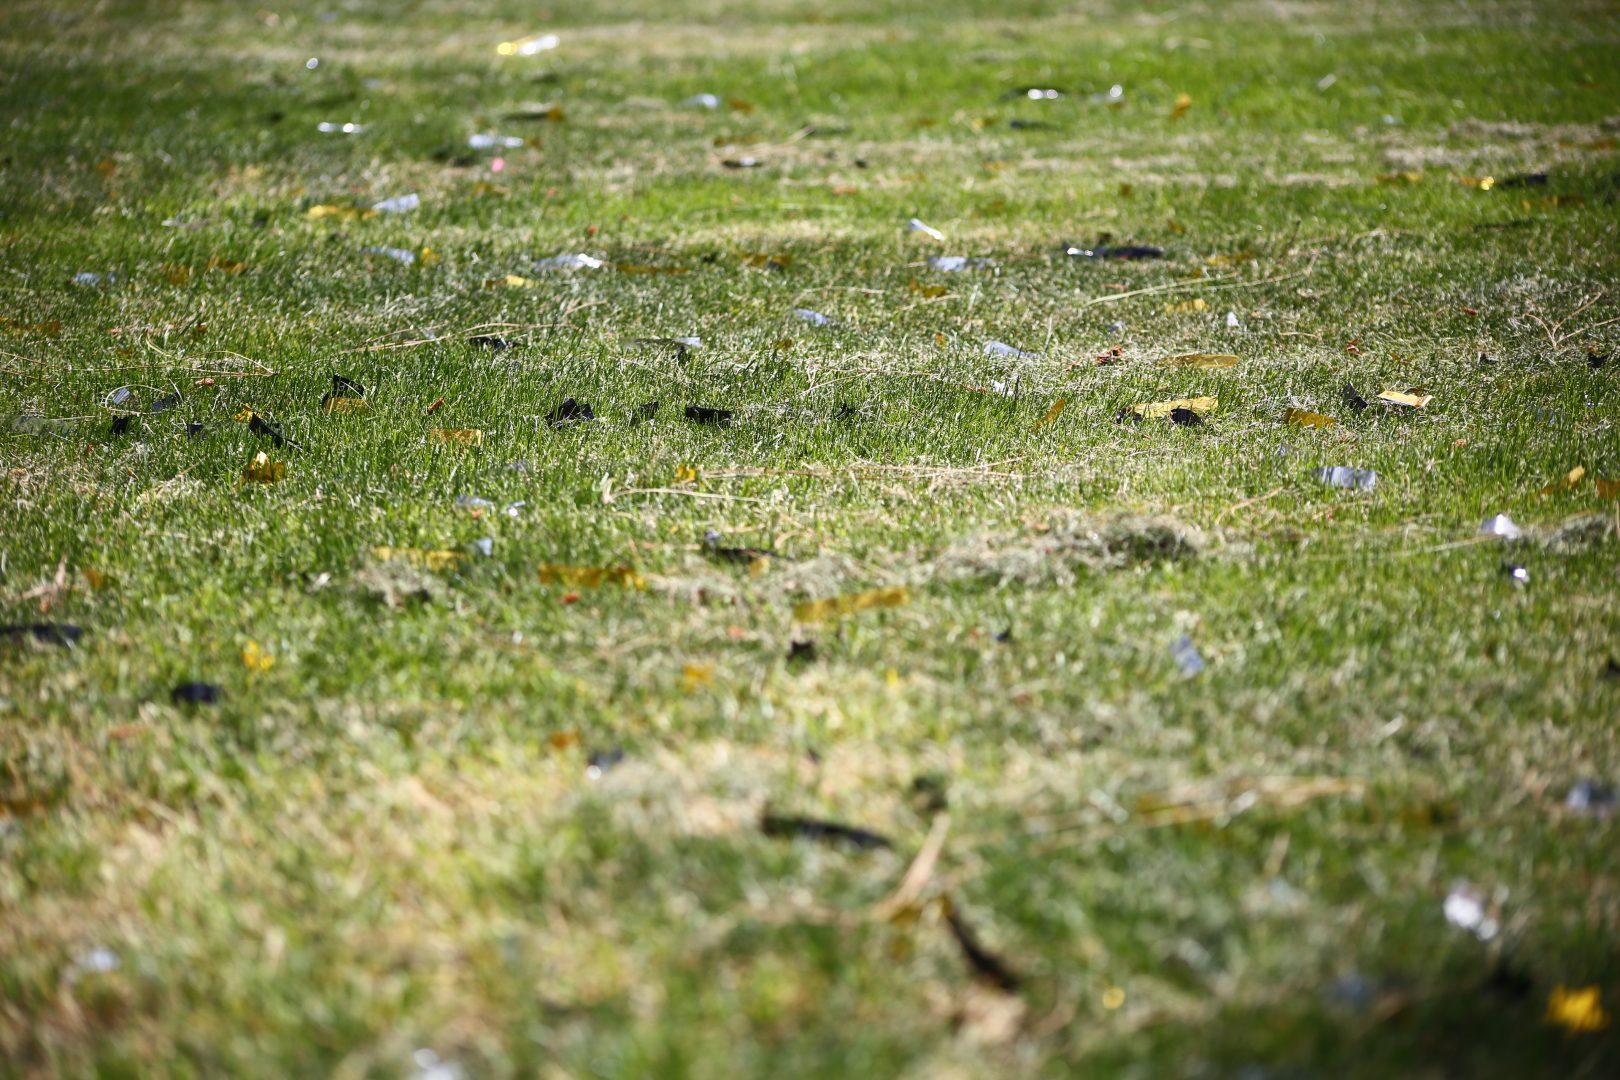 Confetti left behind on the grass in front of the Kennel Bookstore. (JesÃºs Cano/The Collegian)